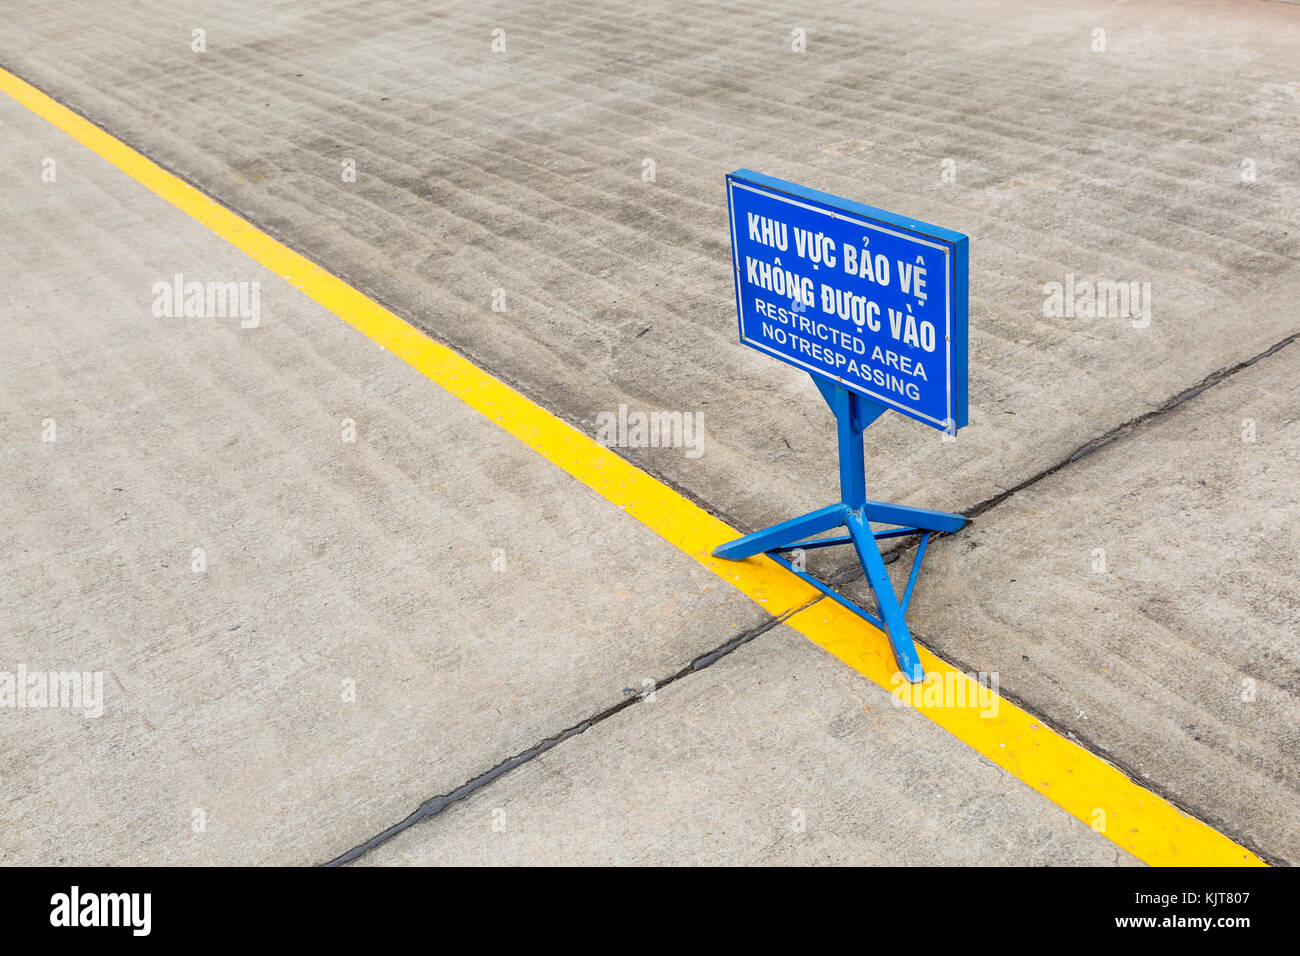 Blue sign for restricted area (no trespassing) in vietnamese and english behind a yellow line in front of the Ho Chi Minh mausoleum in Hanoi, Vietnam Stock Photo